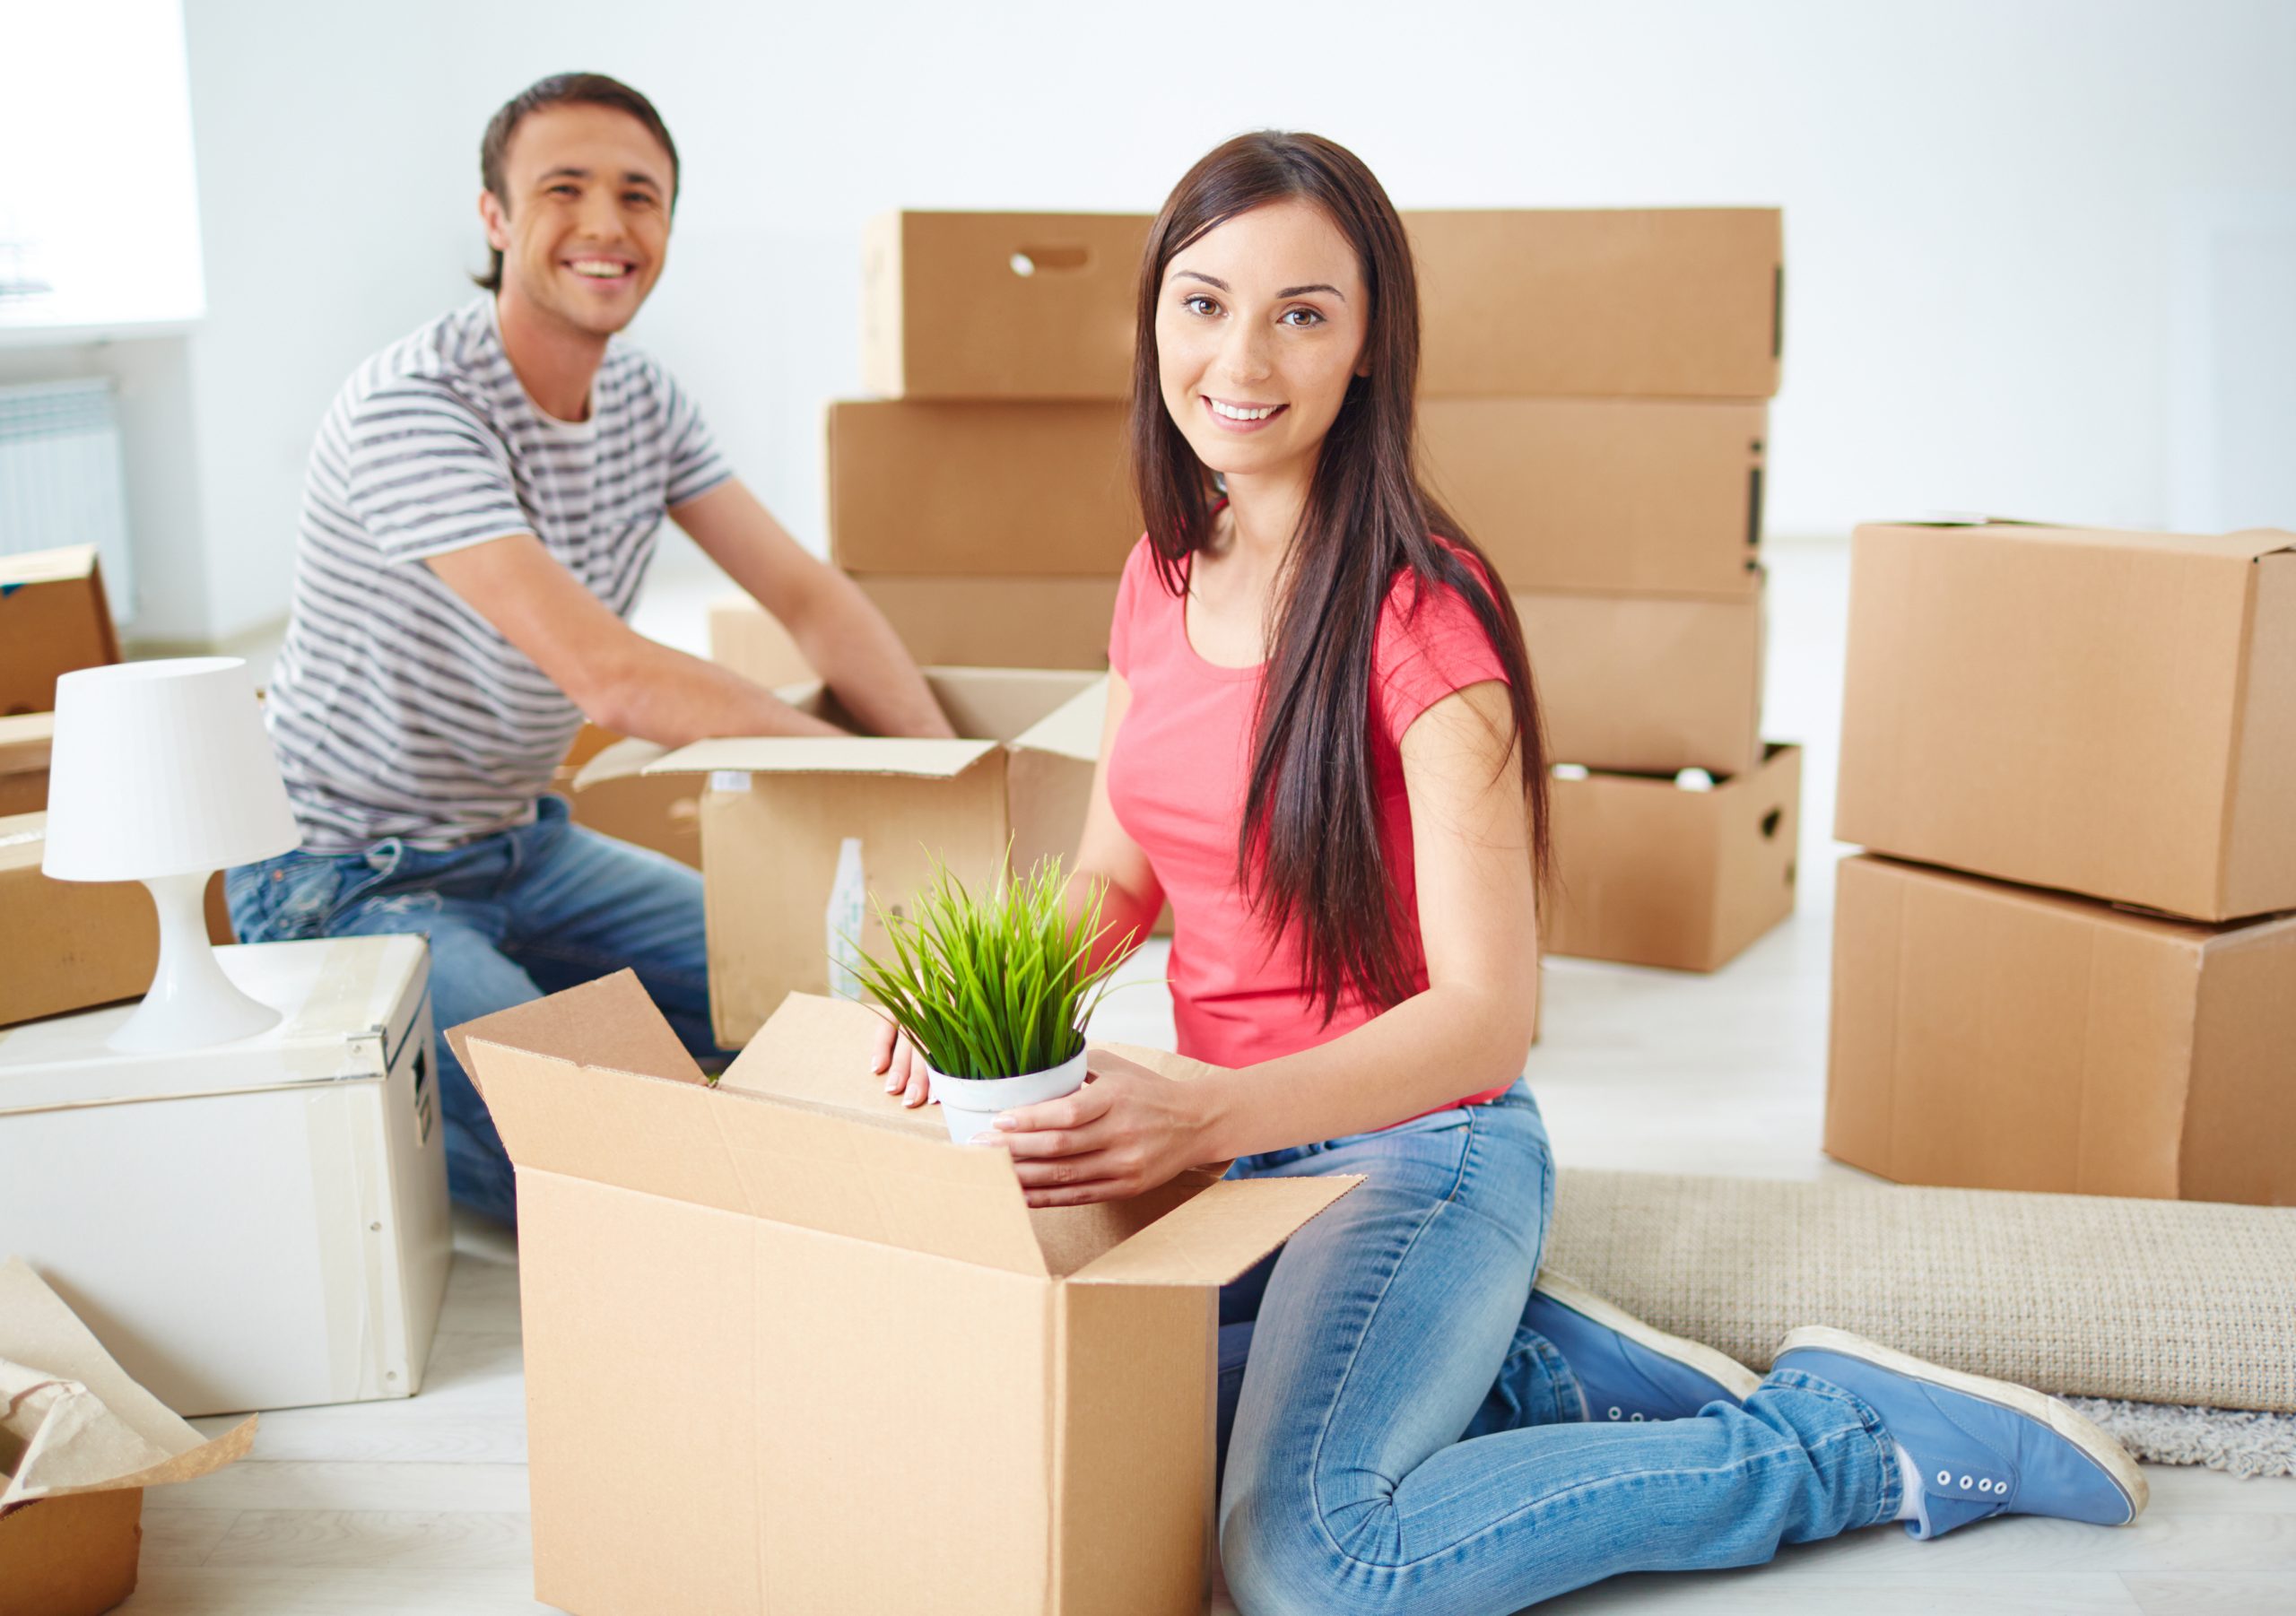 Moving company in Canada